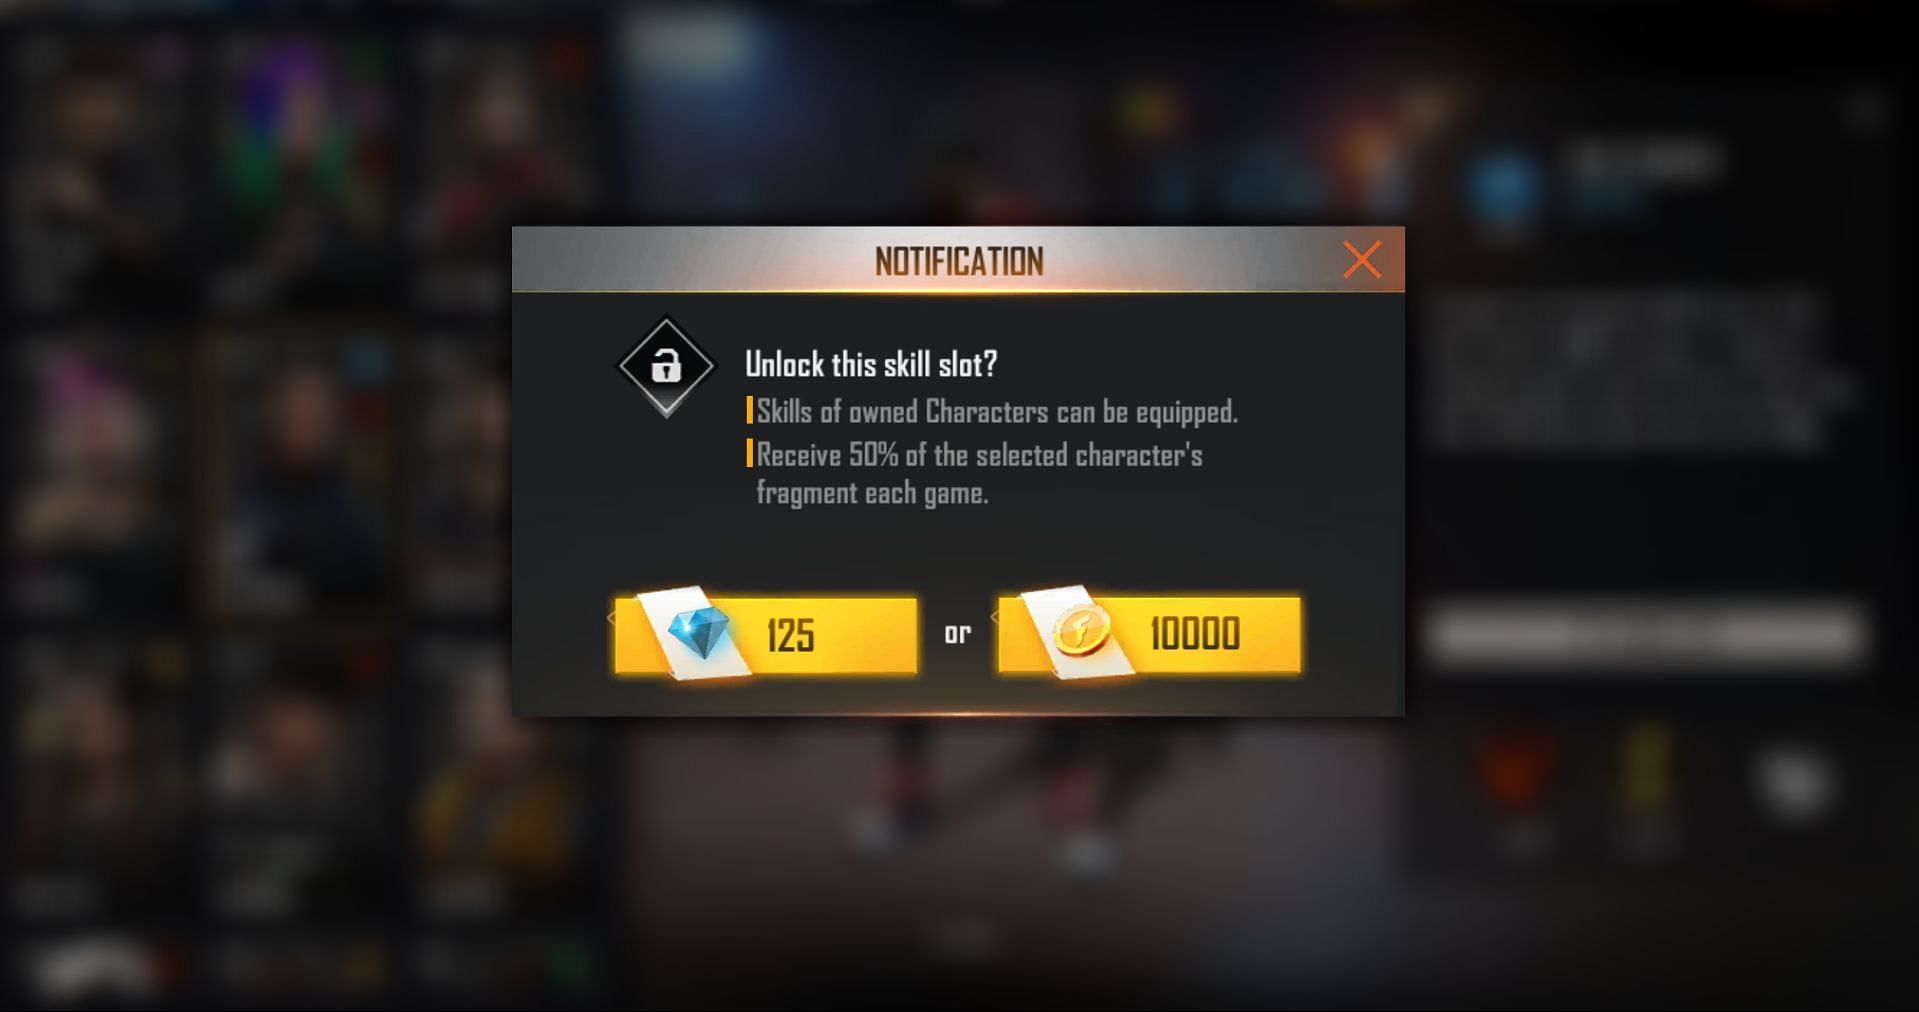 Skill slots also require users to spend gold